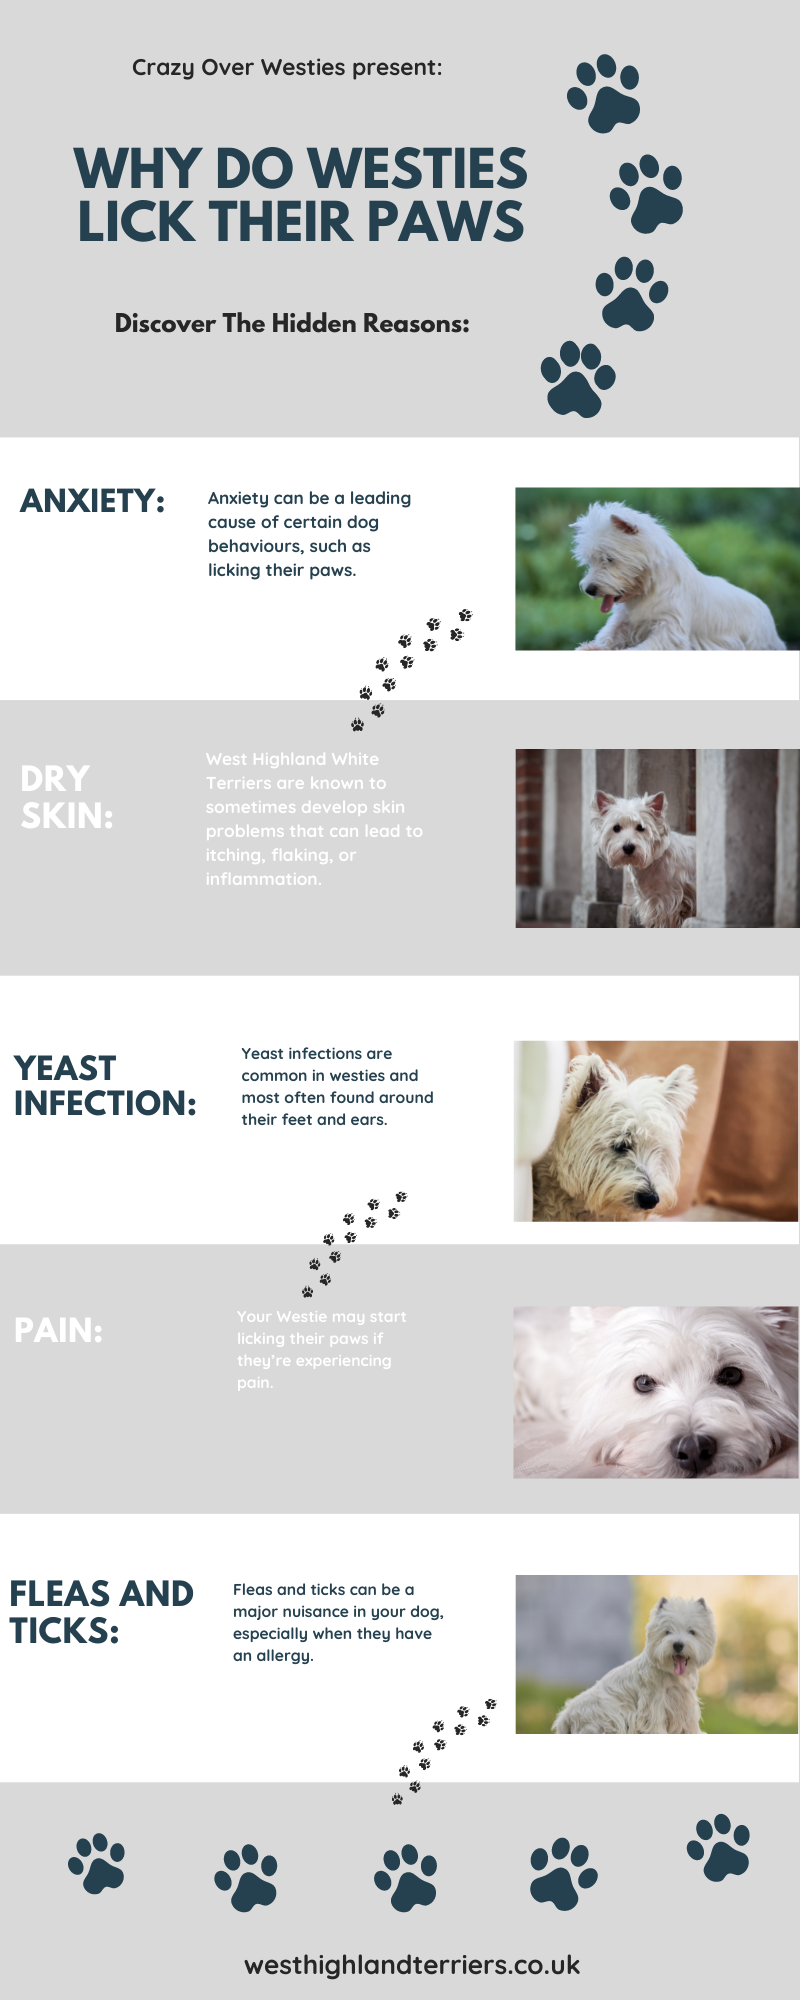 why do westies lick their paws infographic